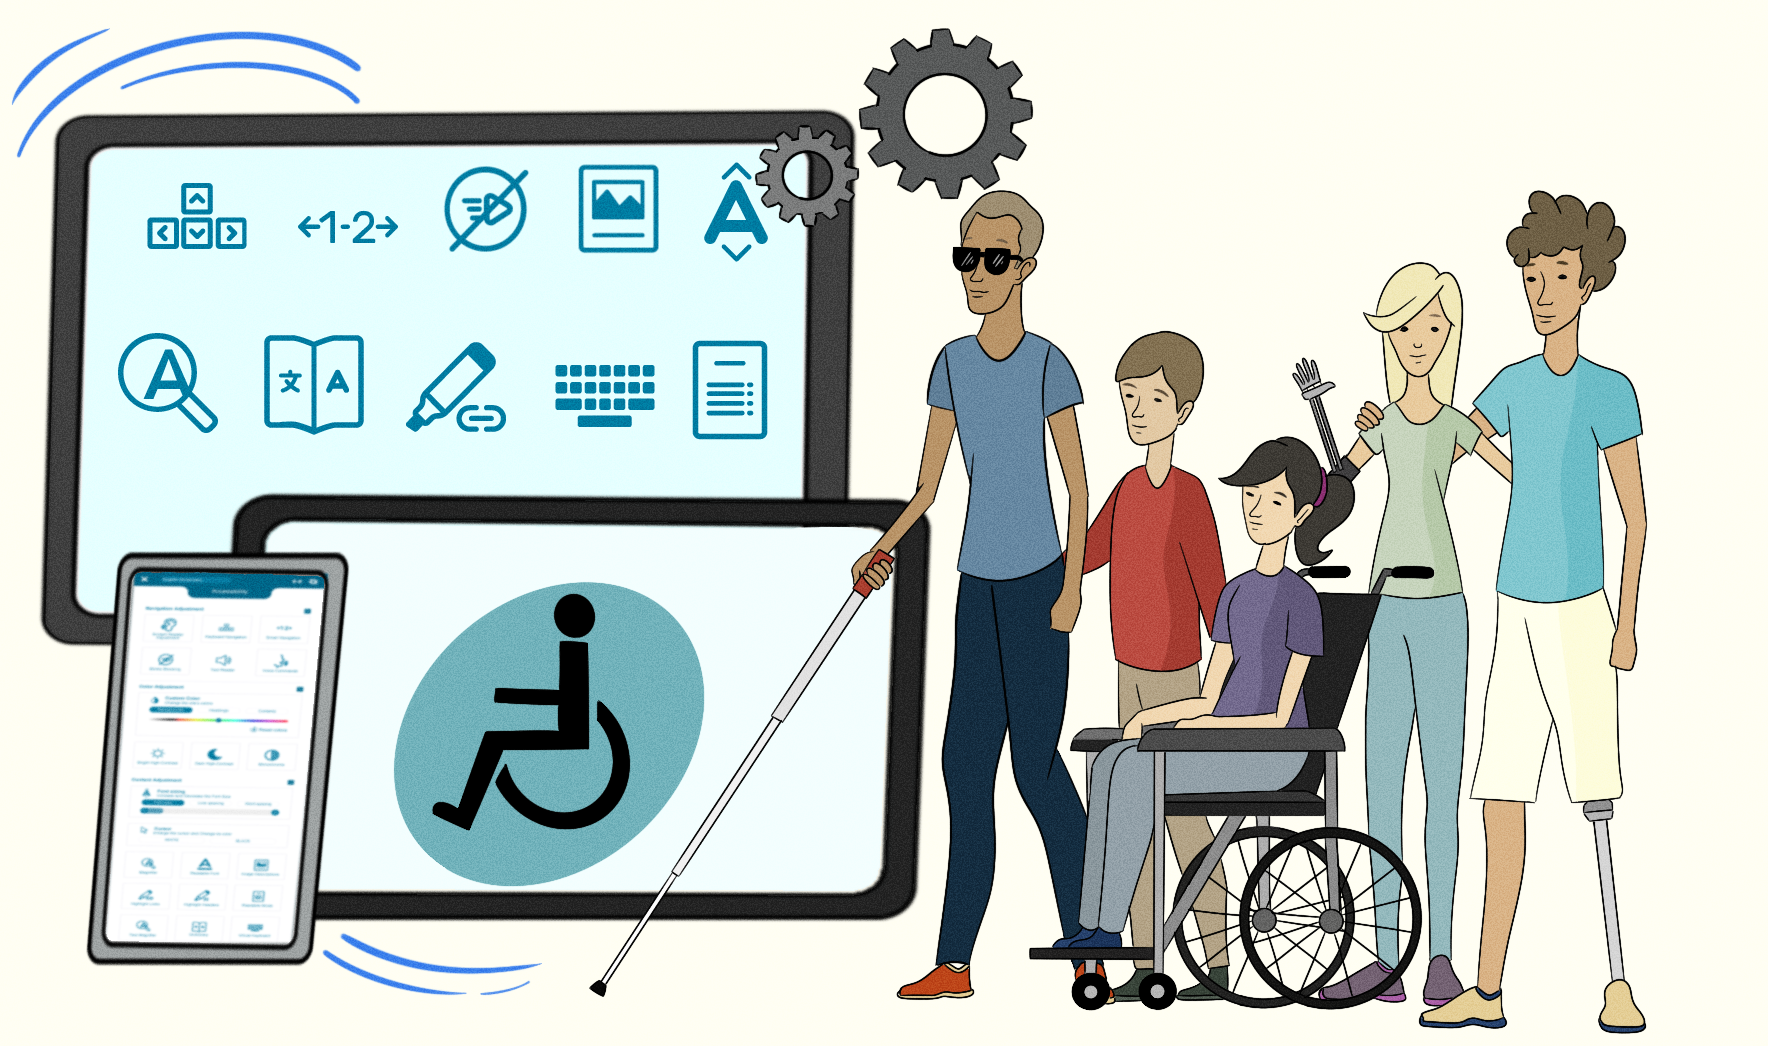 The road to an equal web includes assistive technology